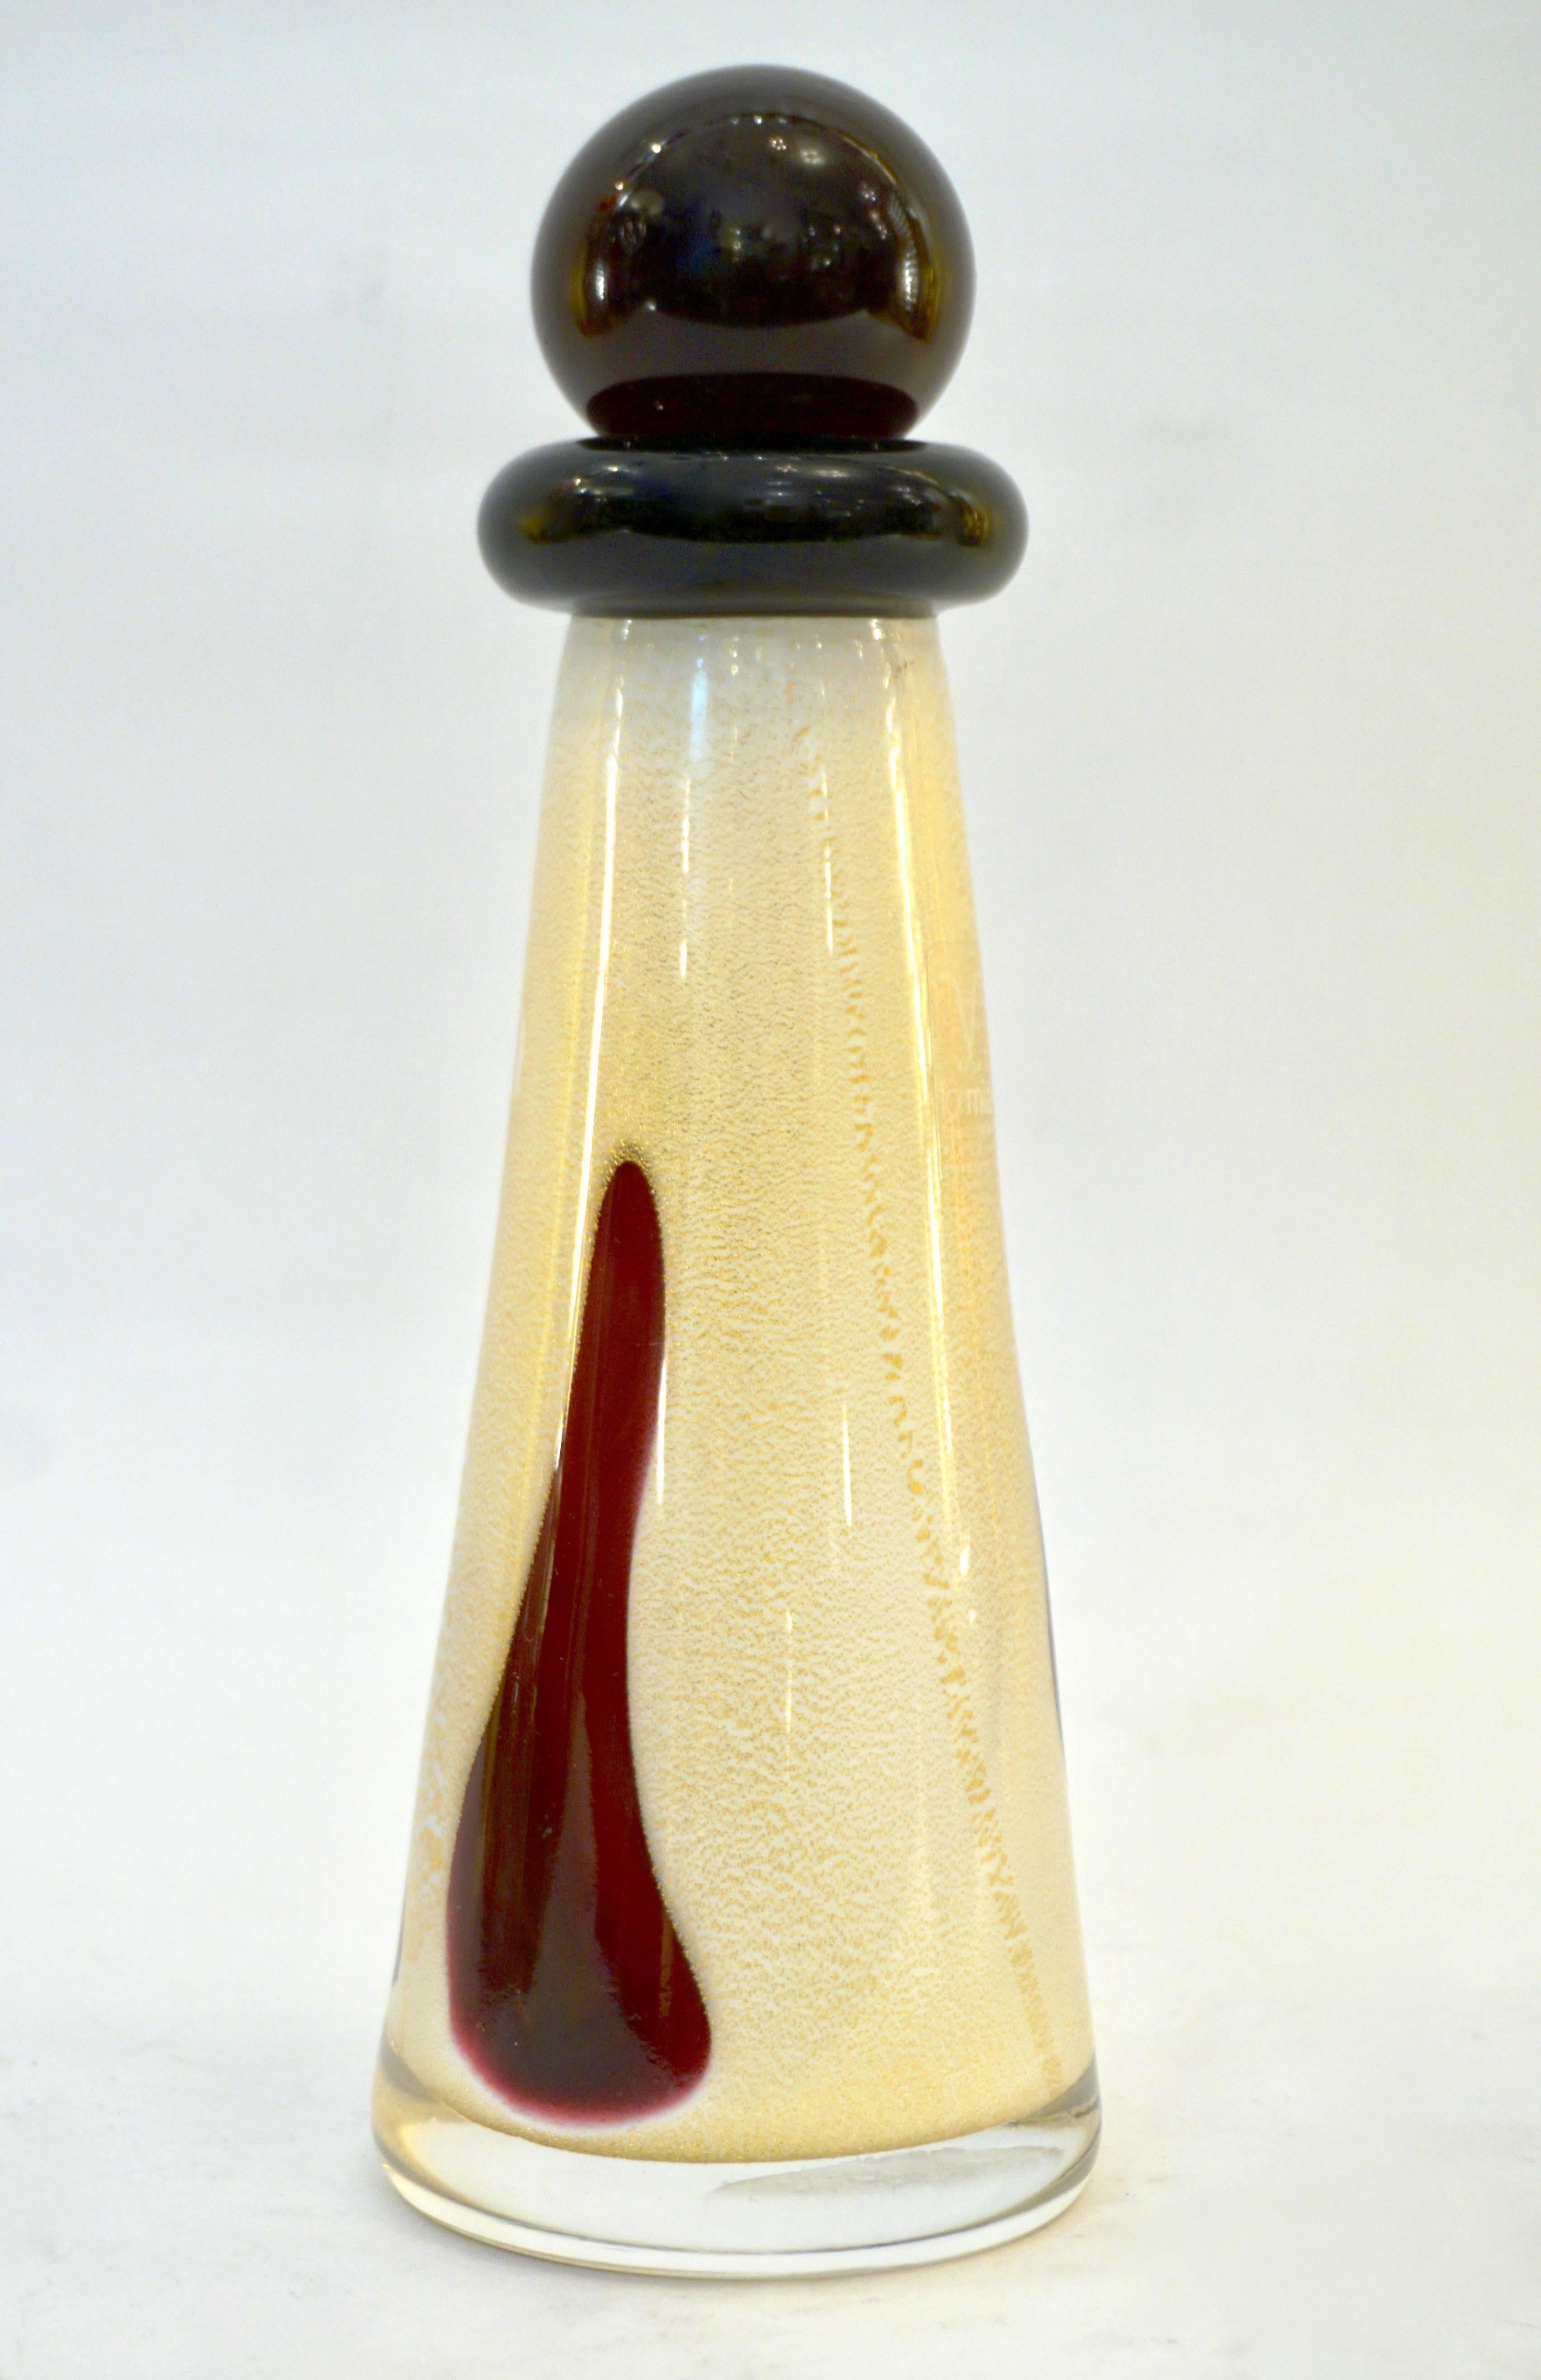 Hand-Crafted 1980 Italian Ivory Gold Black and Burgundy Red Murano Glass Perfume Bottle